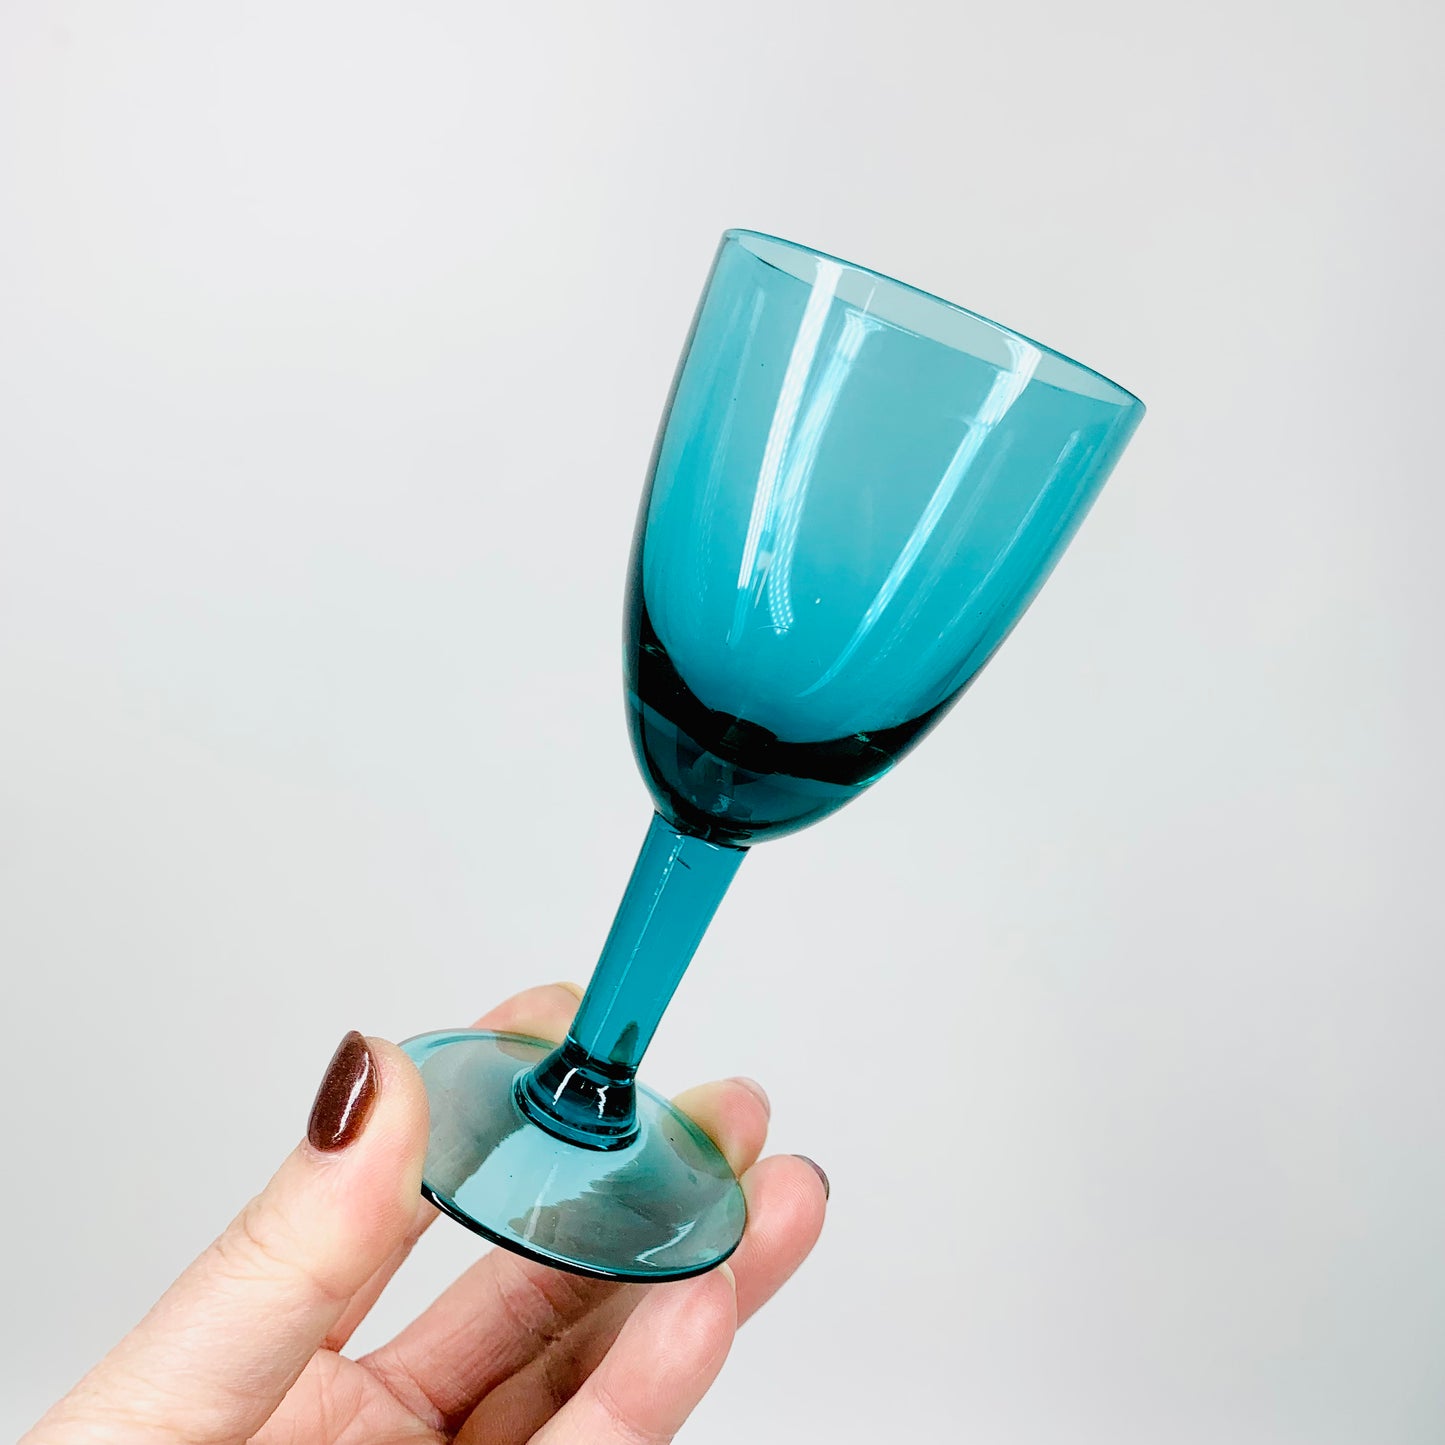 Midcentury Scandinavian turquoise glass decanter set with matching glasses